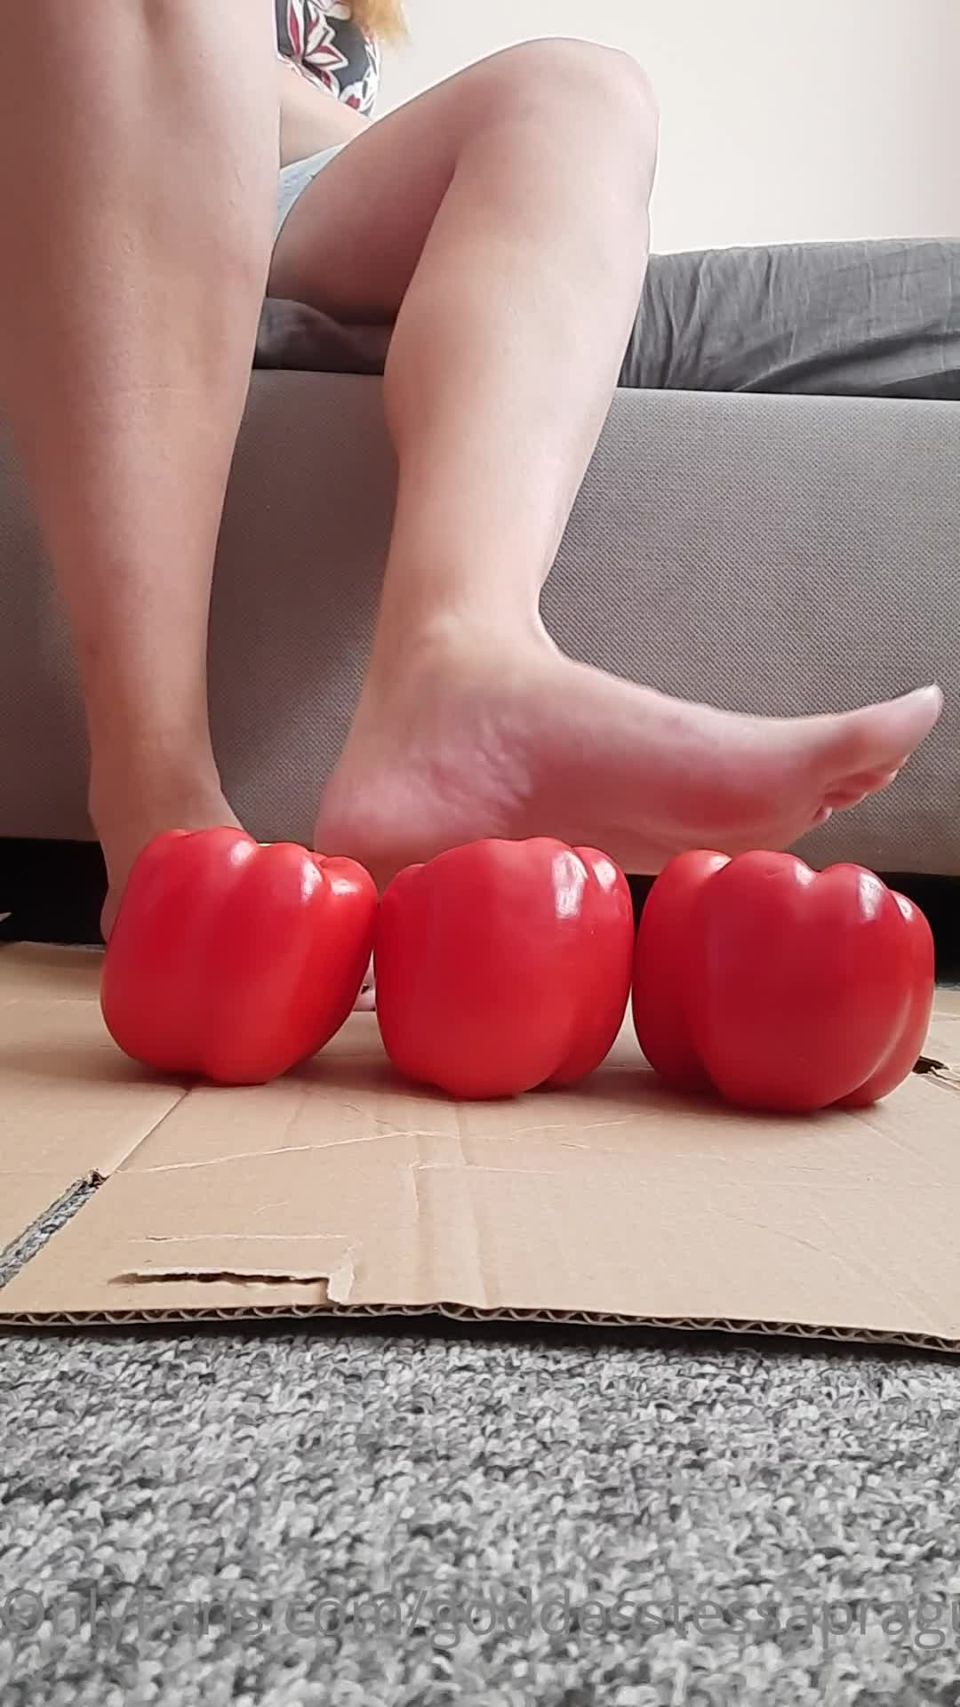 free online video 38 dirty feet fetish Onlyfans - Goddess Tessa - 45 Size Feet Goddess - Destroying 3 Peppers With 1 Step And Smashing It Completly - UltraHD 1920p, fetish on femdom porn